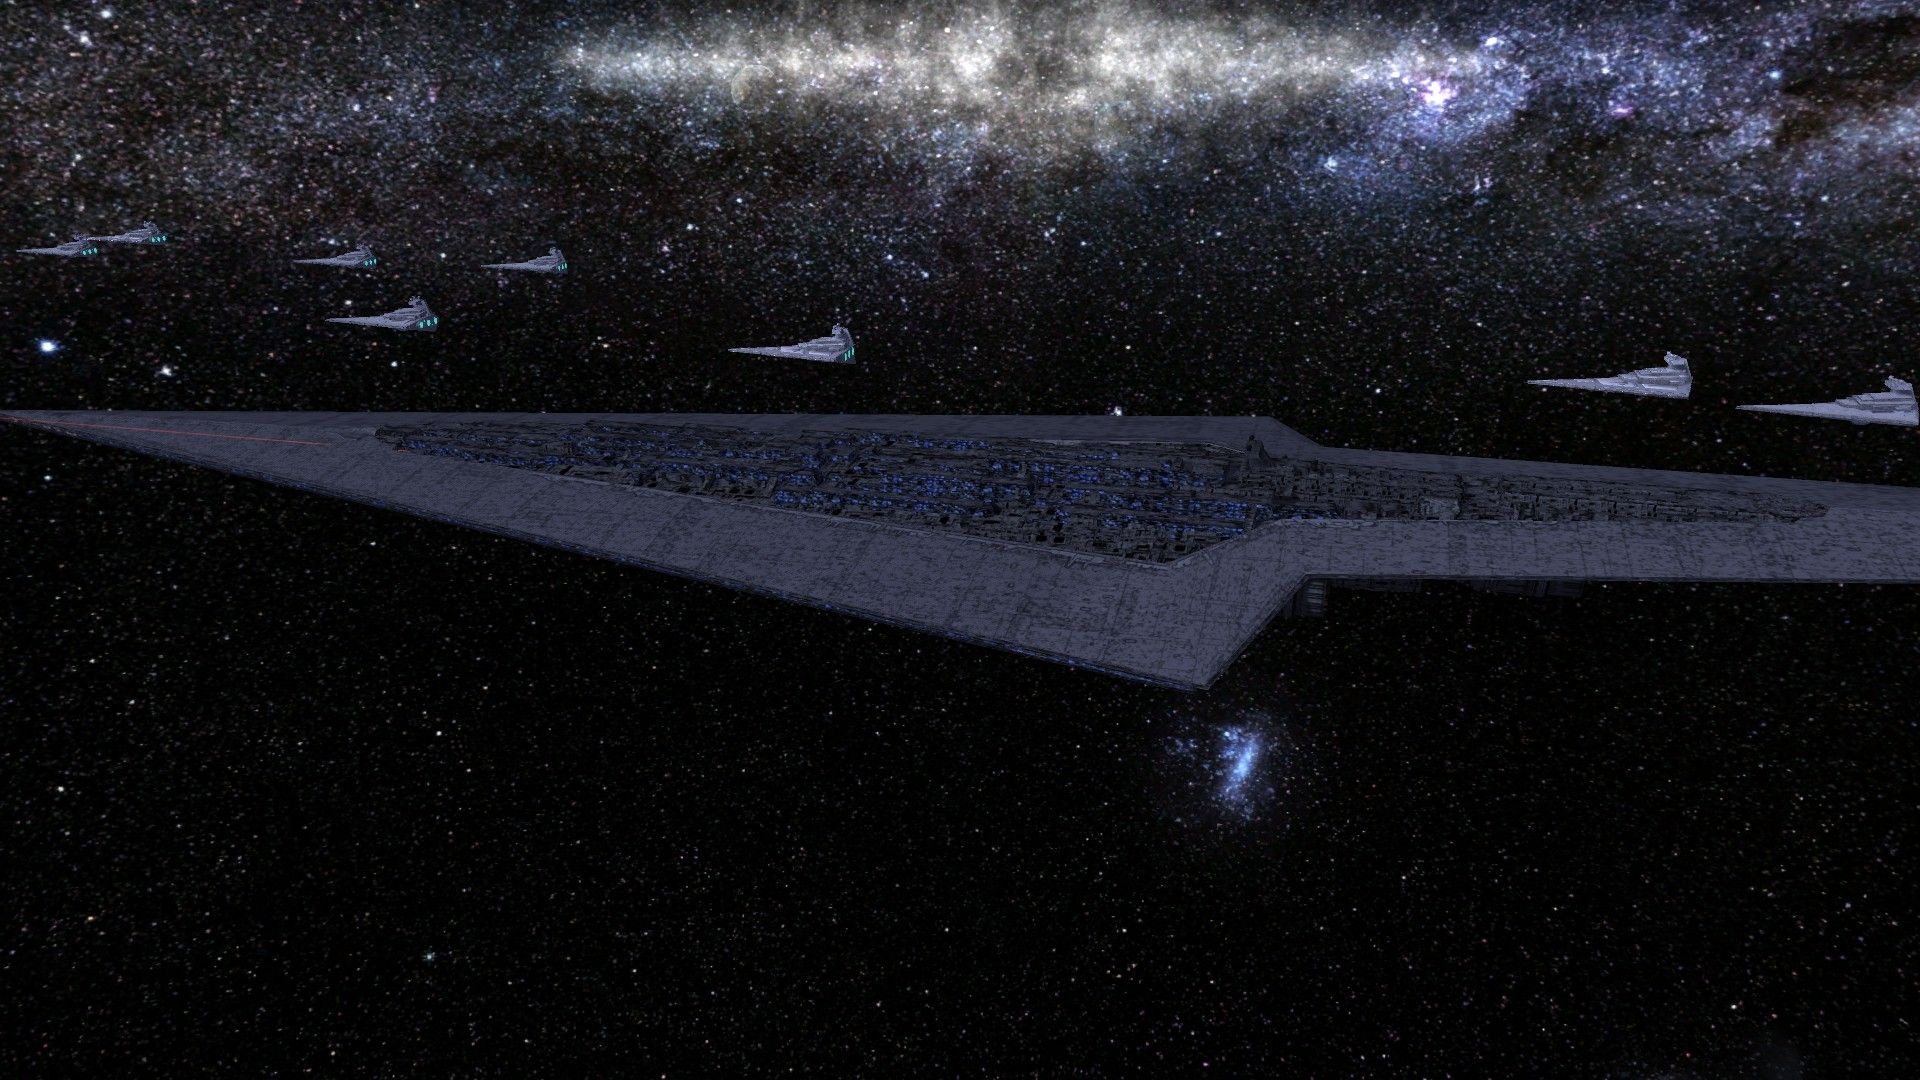 An Imperial Fleet image of a Galactic Empire mod for Sins of a Solar Empire: Rebellion